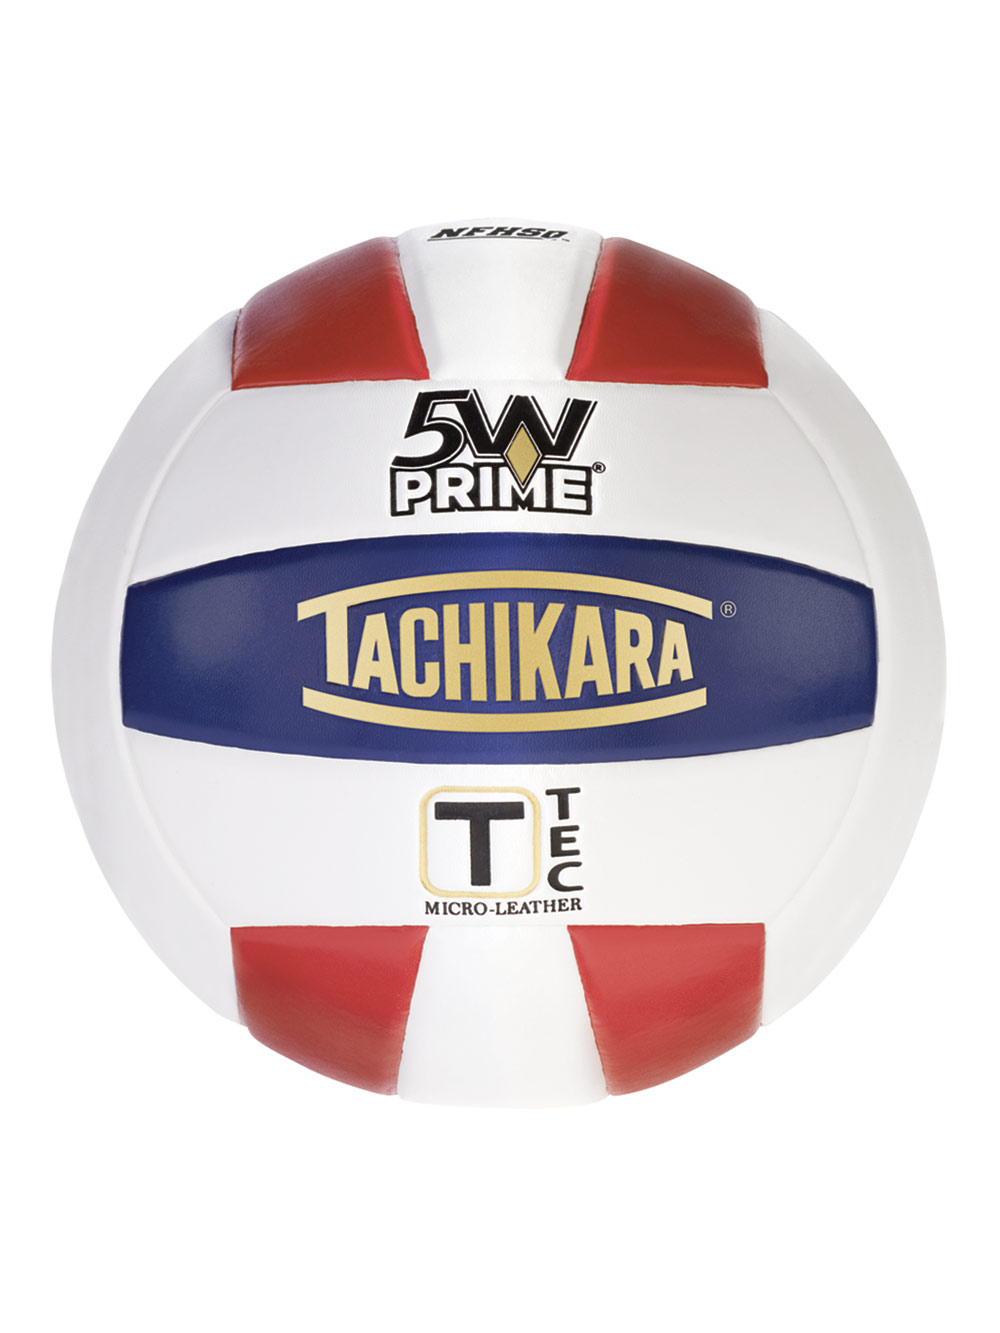 Tachikara 5W Prime Volleyball | Midwest Volleyball Warehouse